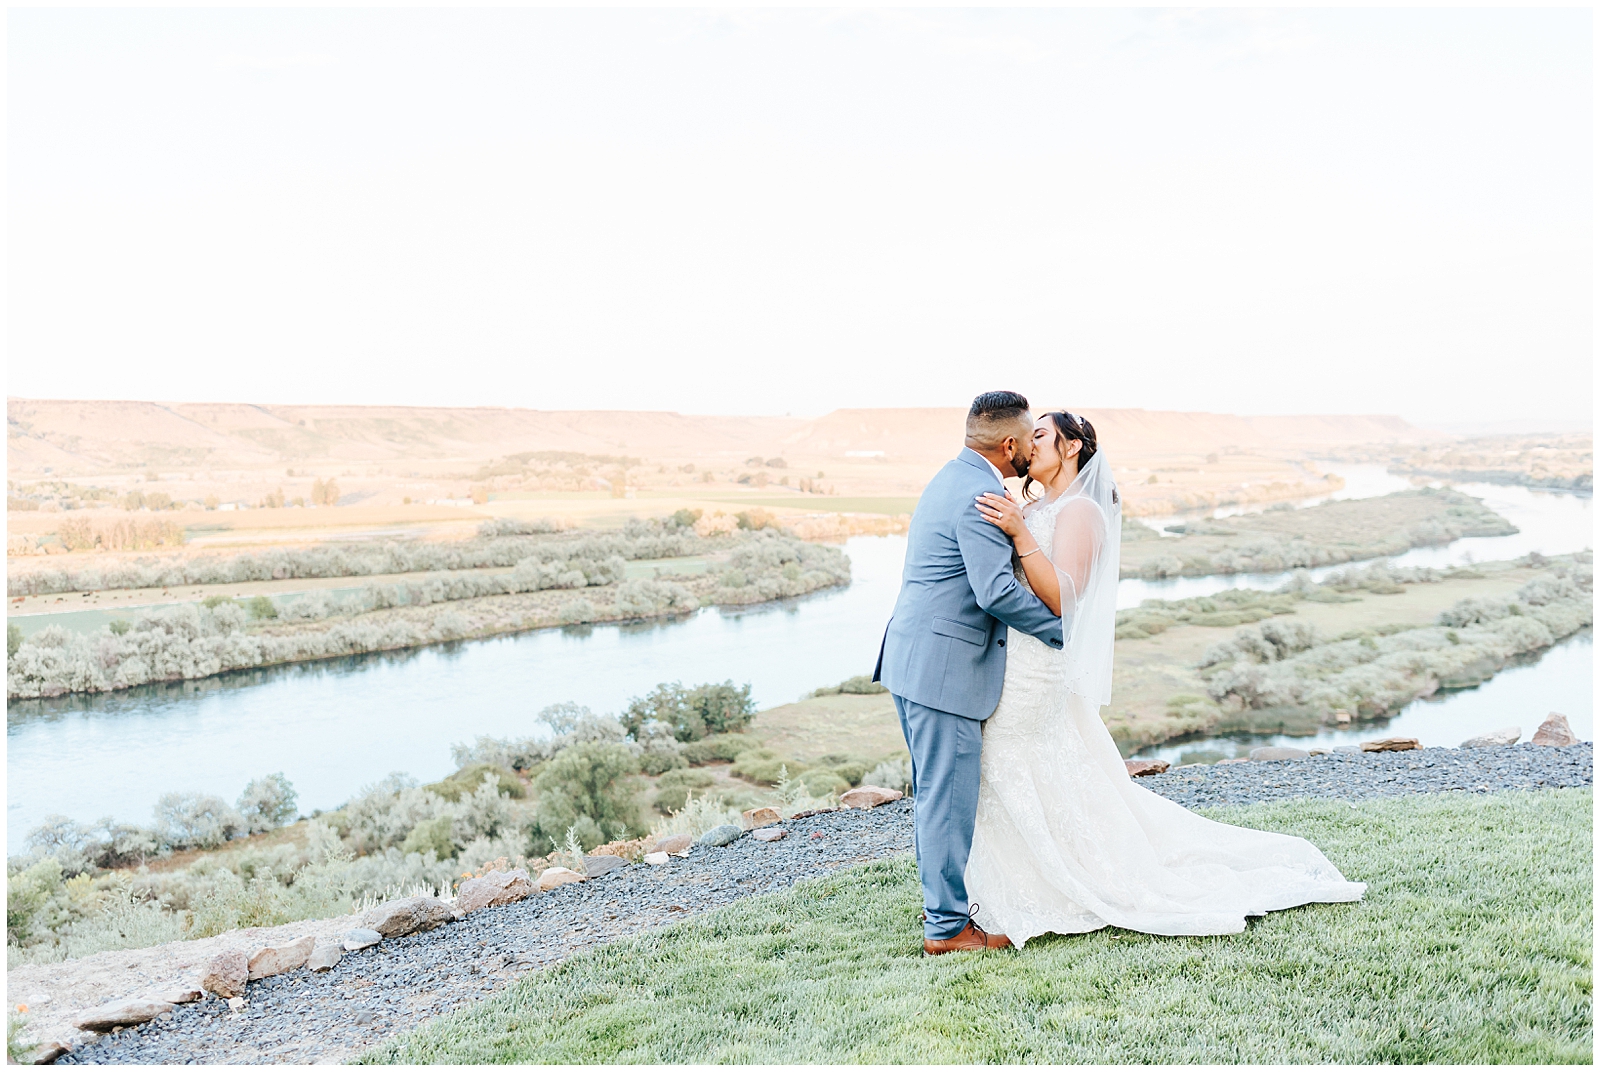 Dusty Blue Fox Canyon Vineyards Wedding at Golden Hour